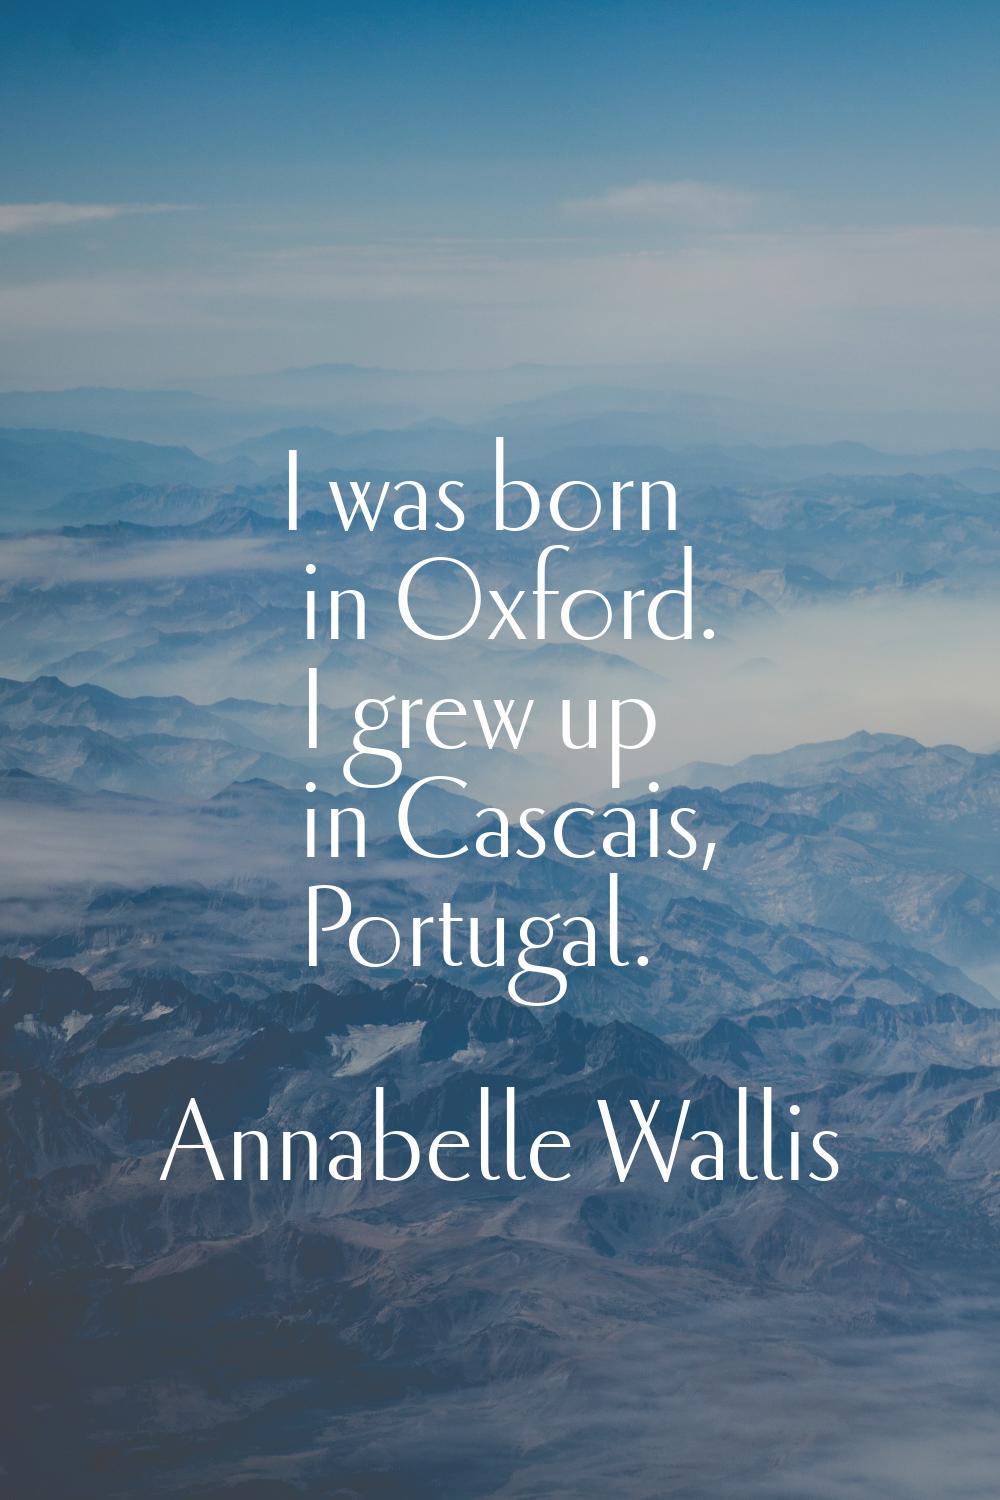 I was born in Oxford. I grew up in Cascais, Portugal.